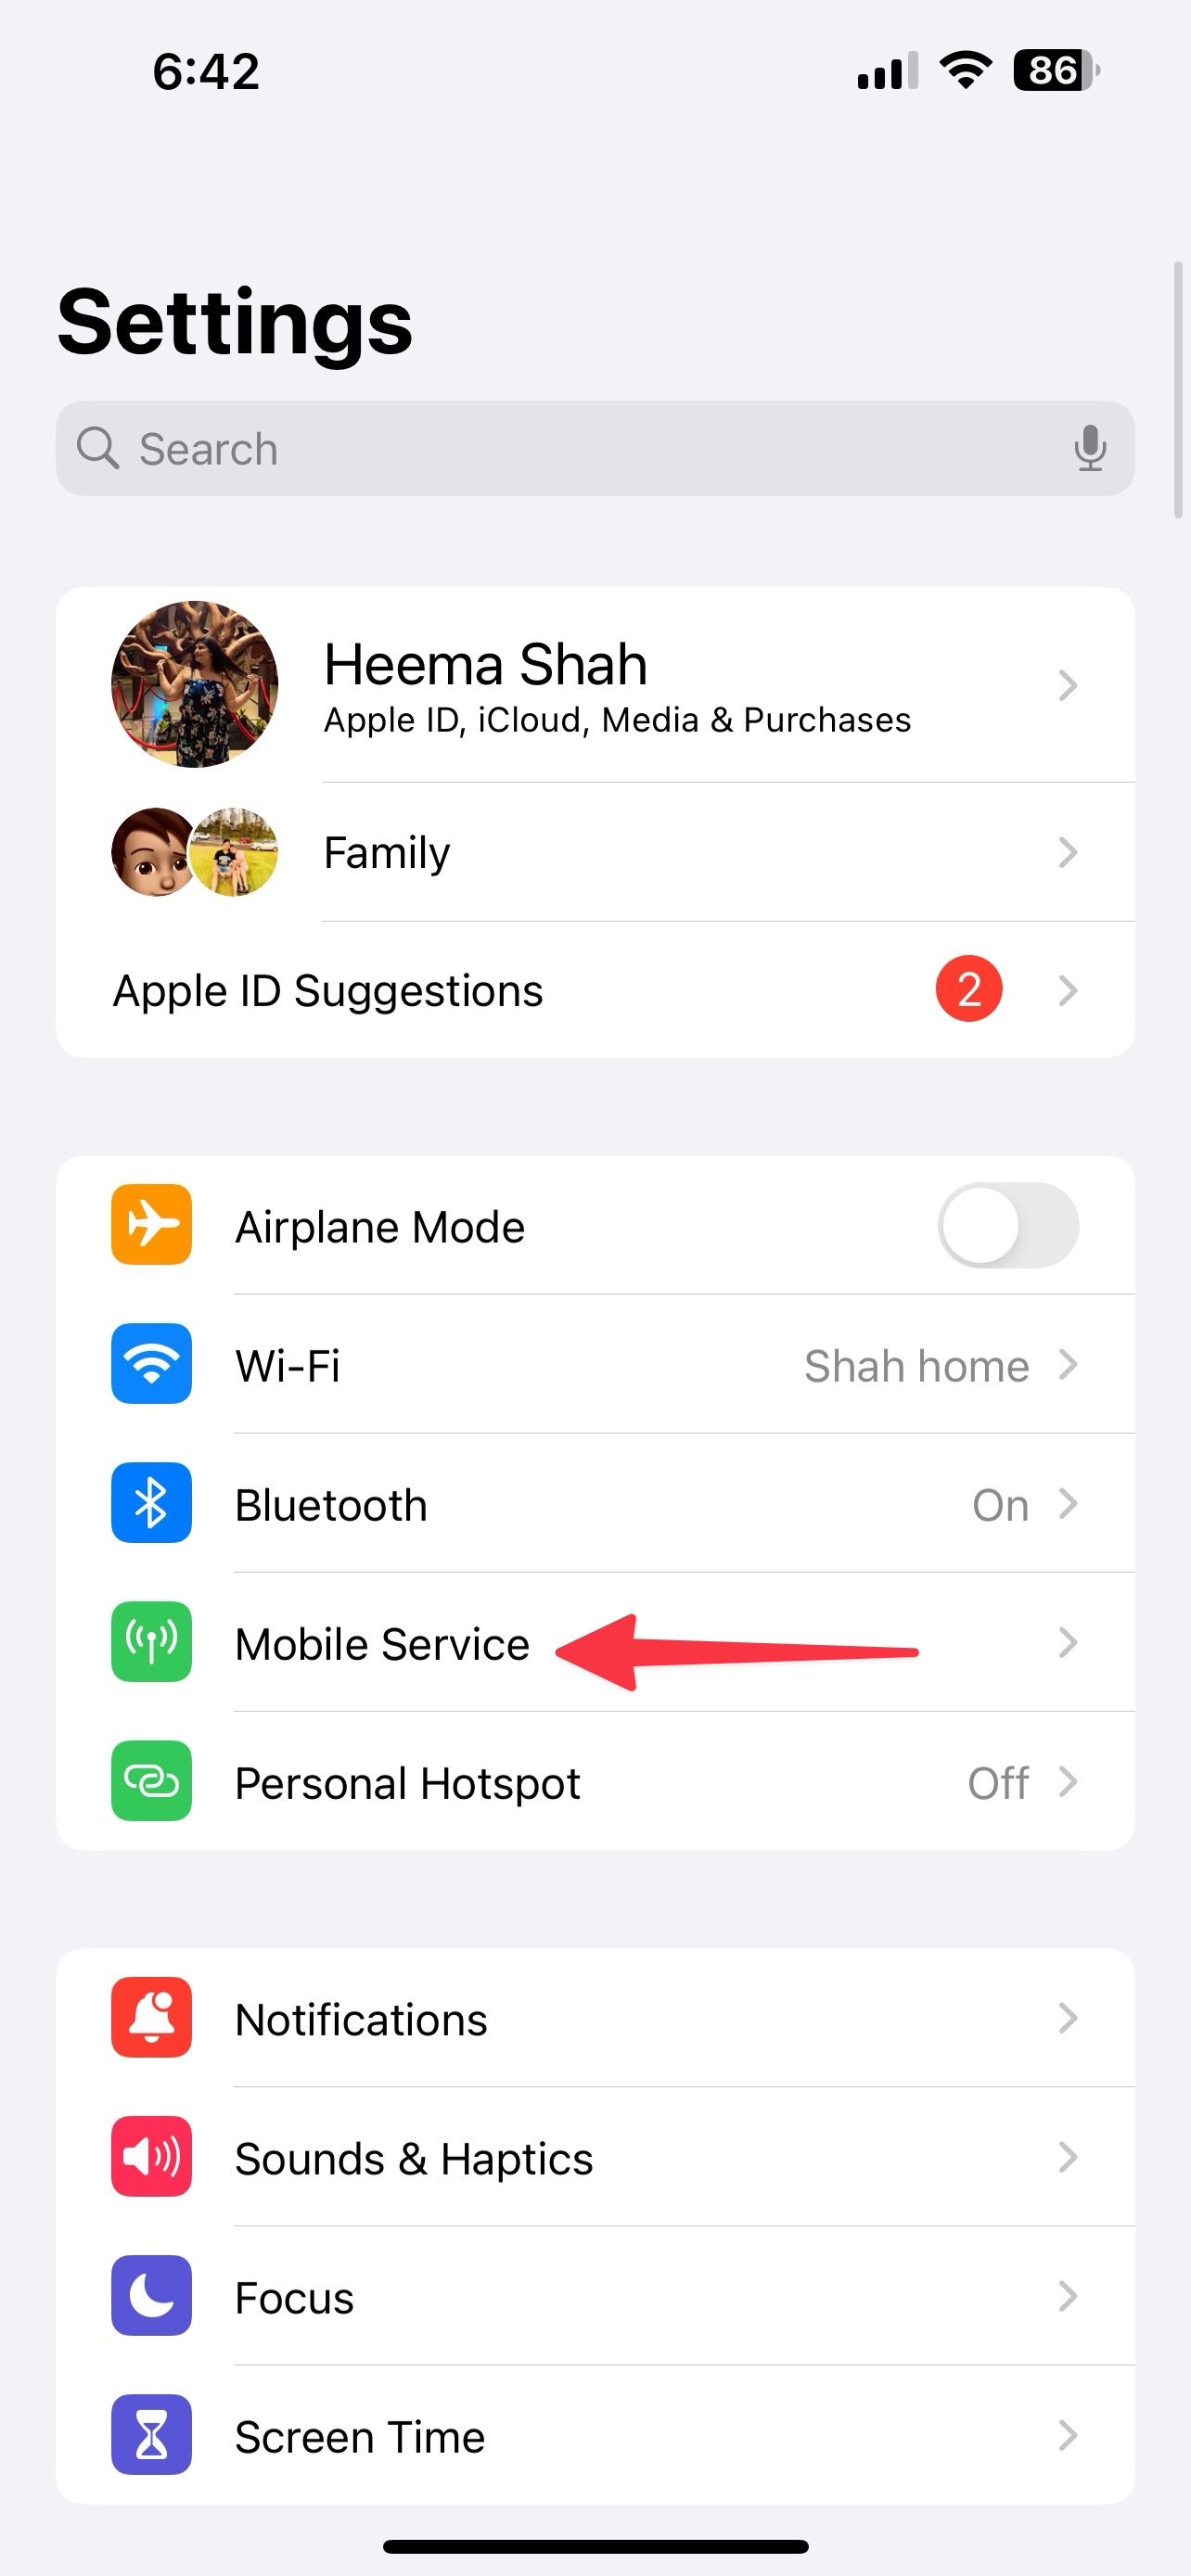 open mobile service on iPhone